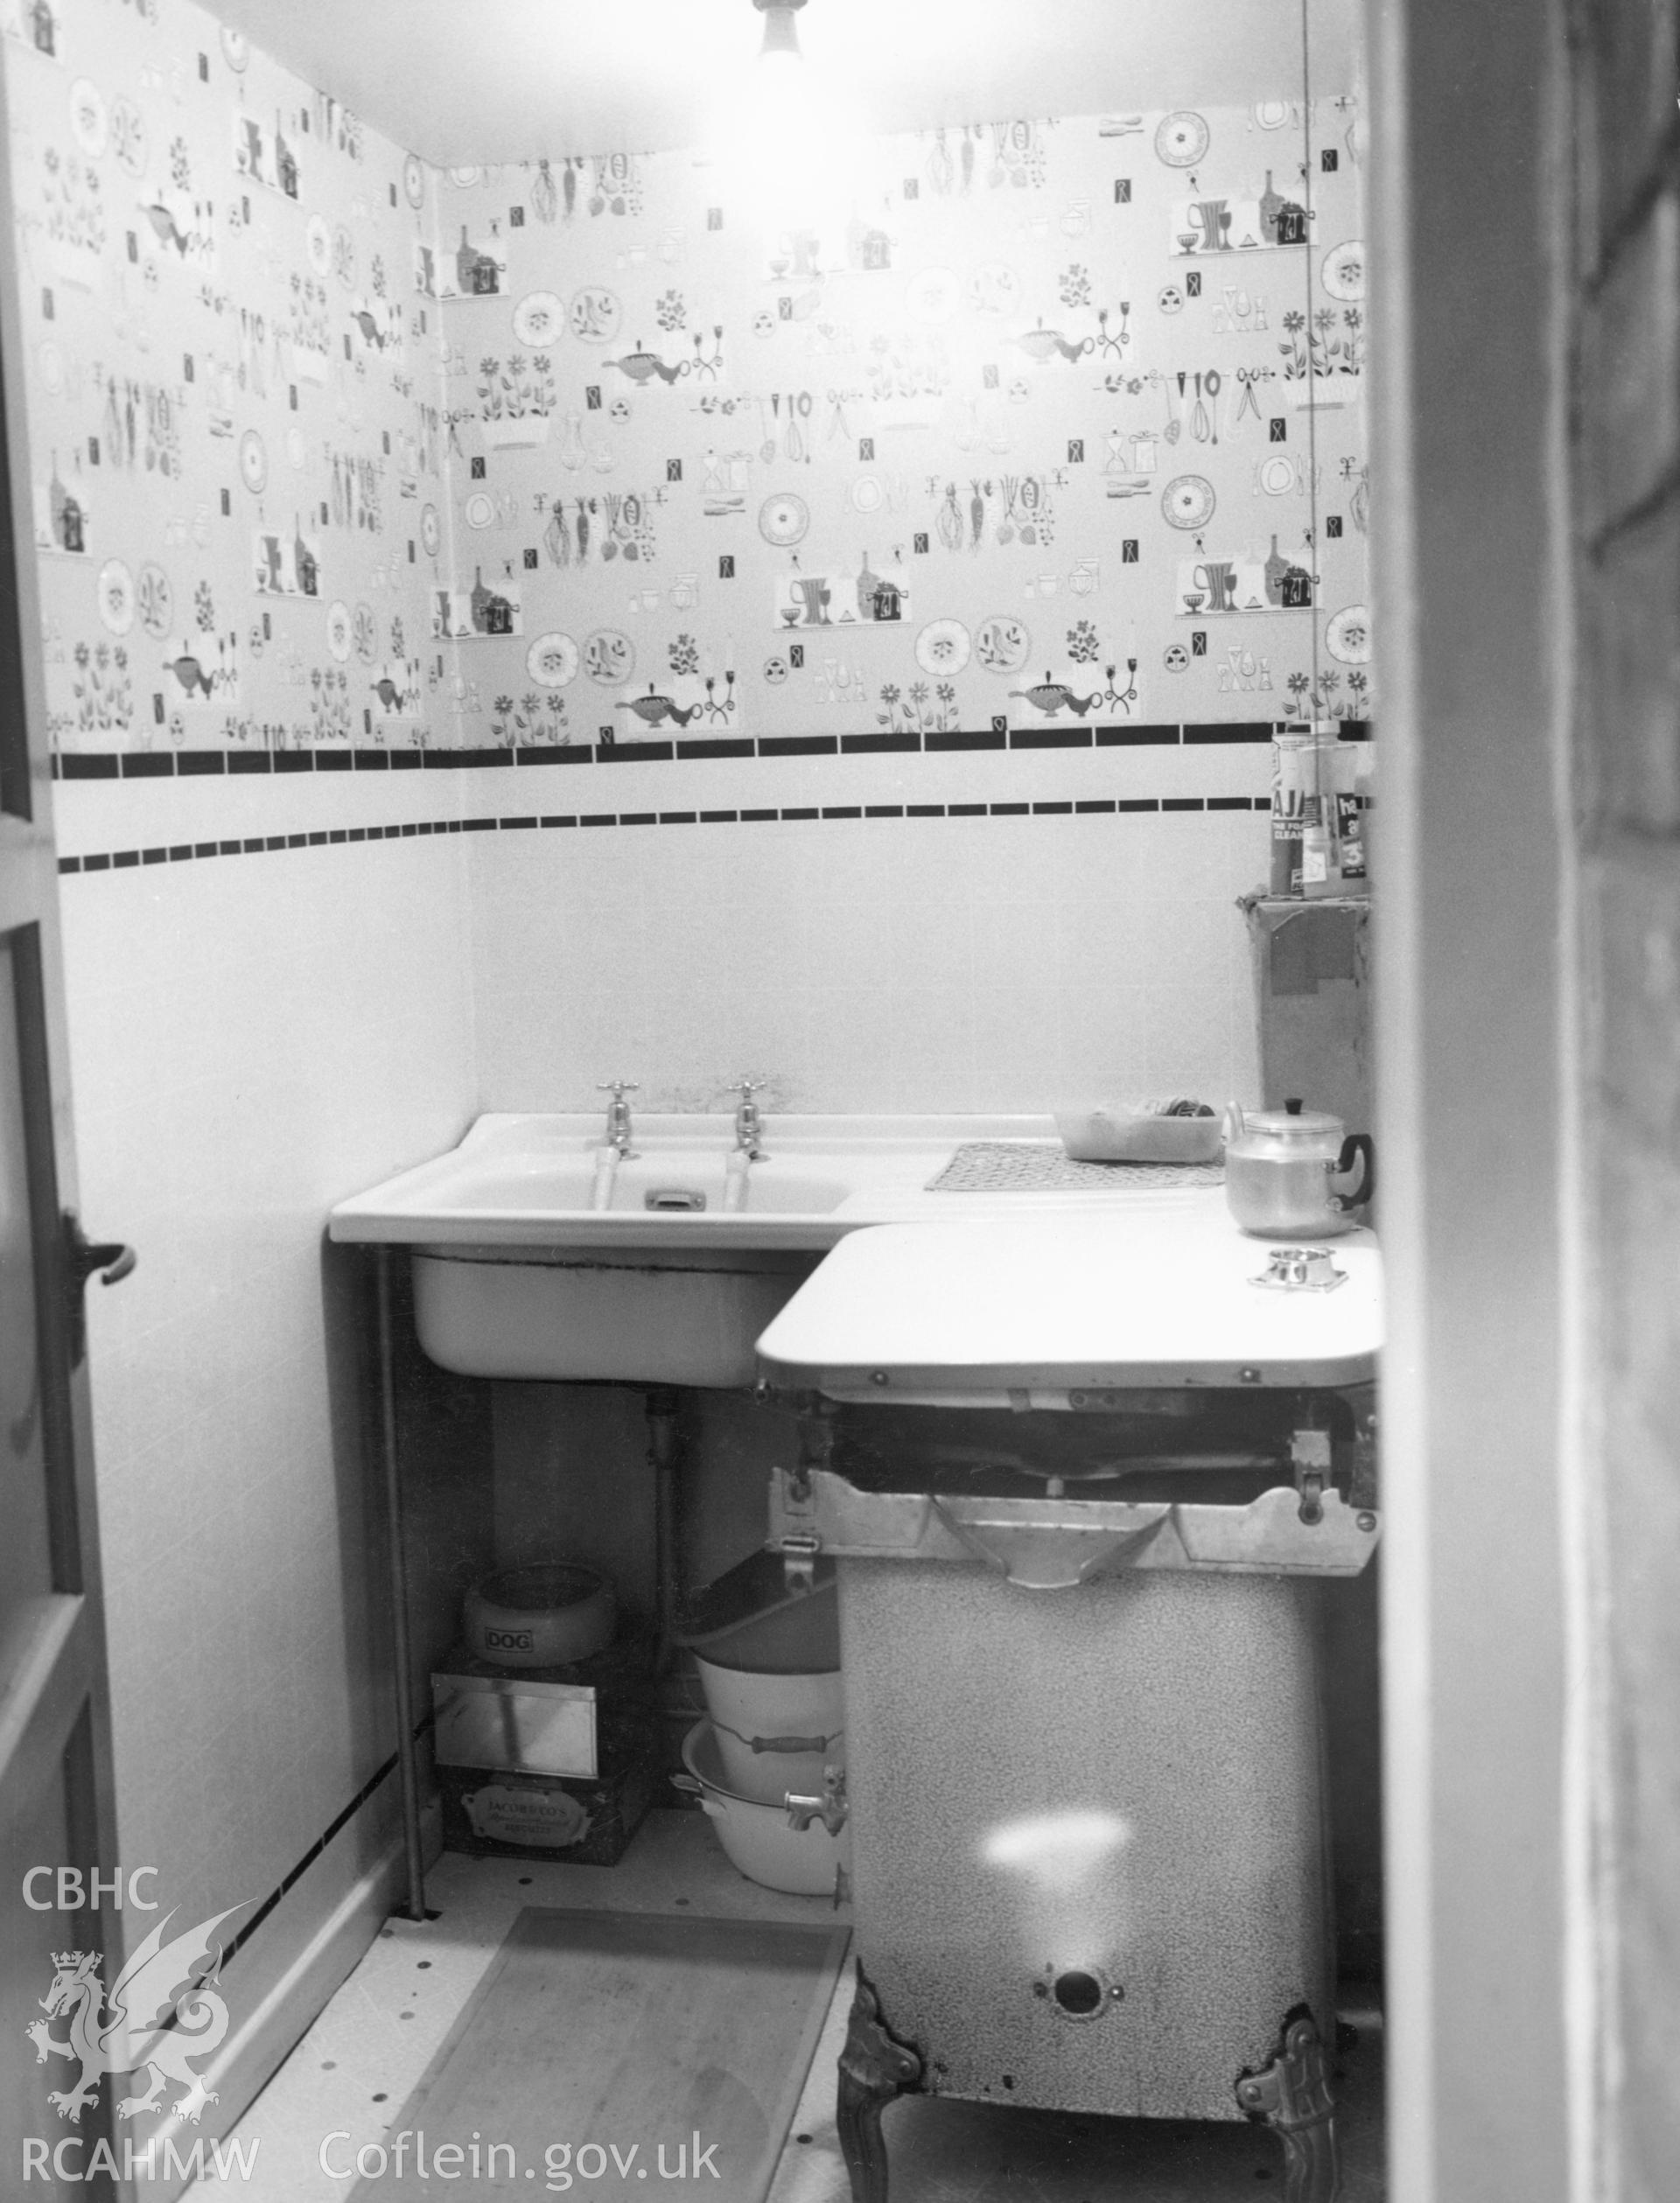 1 b/w print showing interior of a house on Council Street, Ebbw Vale (showing new sink unit), used as an illustration of the Housing Improvement Grant scheme for exhibitions held at Ministry of Housing stands at agricultural shows (1960); collated by the former Central Office of Information.